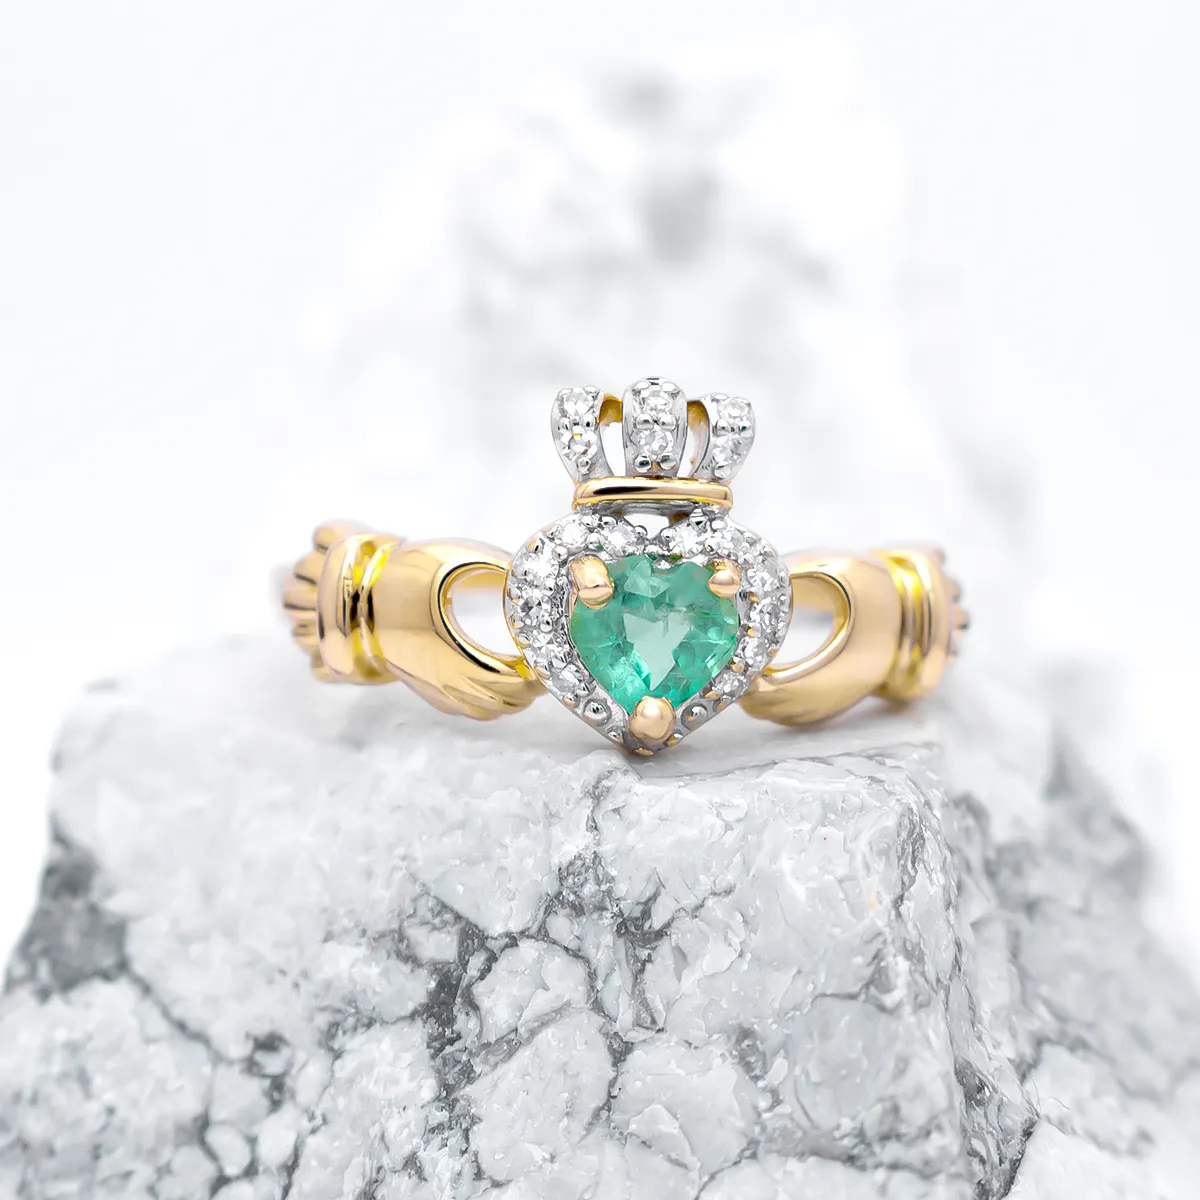 Ladies Emerald And Diamond Claddagh Ring in 14K Gold